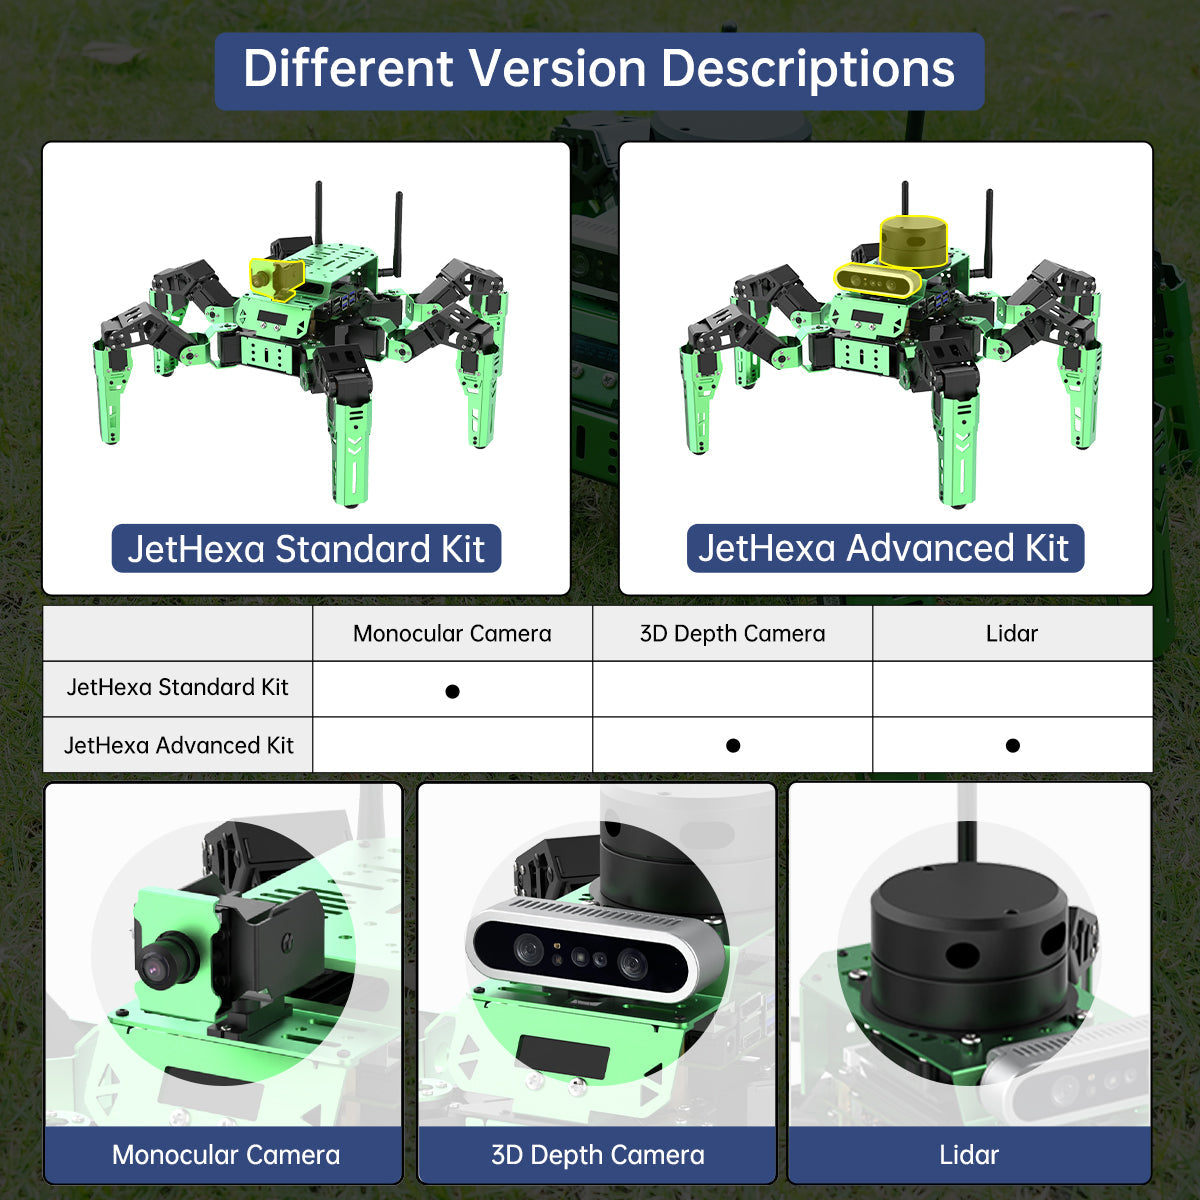 Hiwonder JetHexa ROS Hexapod Robot Kit Powered by Jetson Nano with Lidar Depth Camera Support SLAM Mapping and Navigation